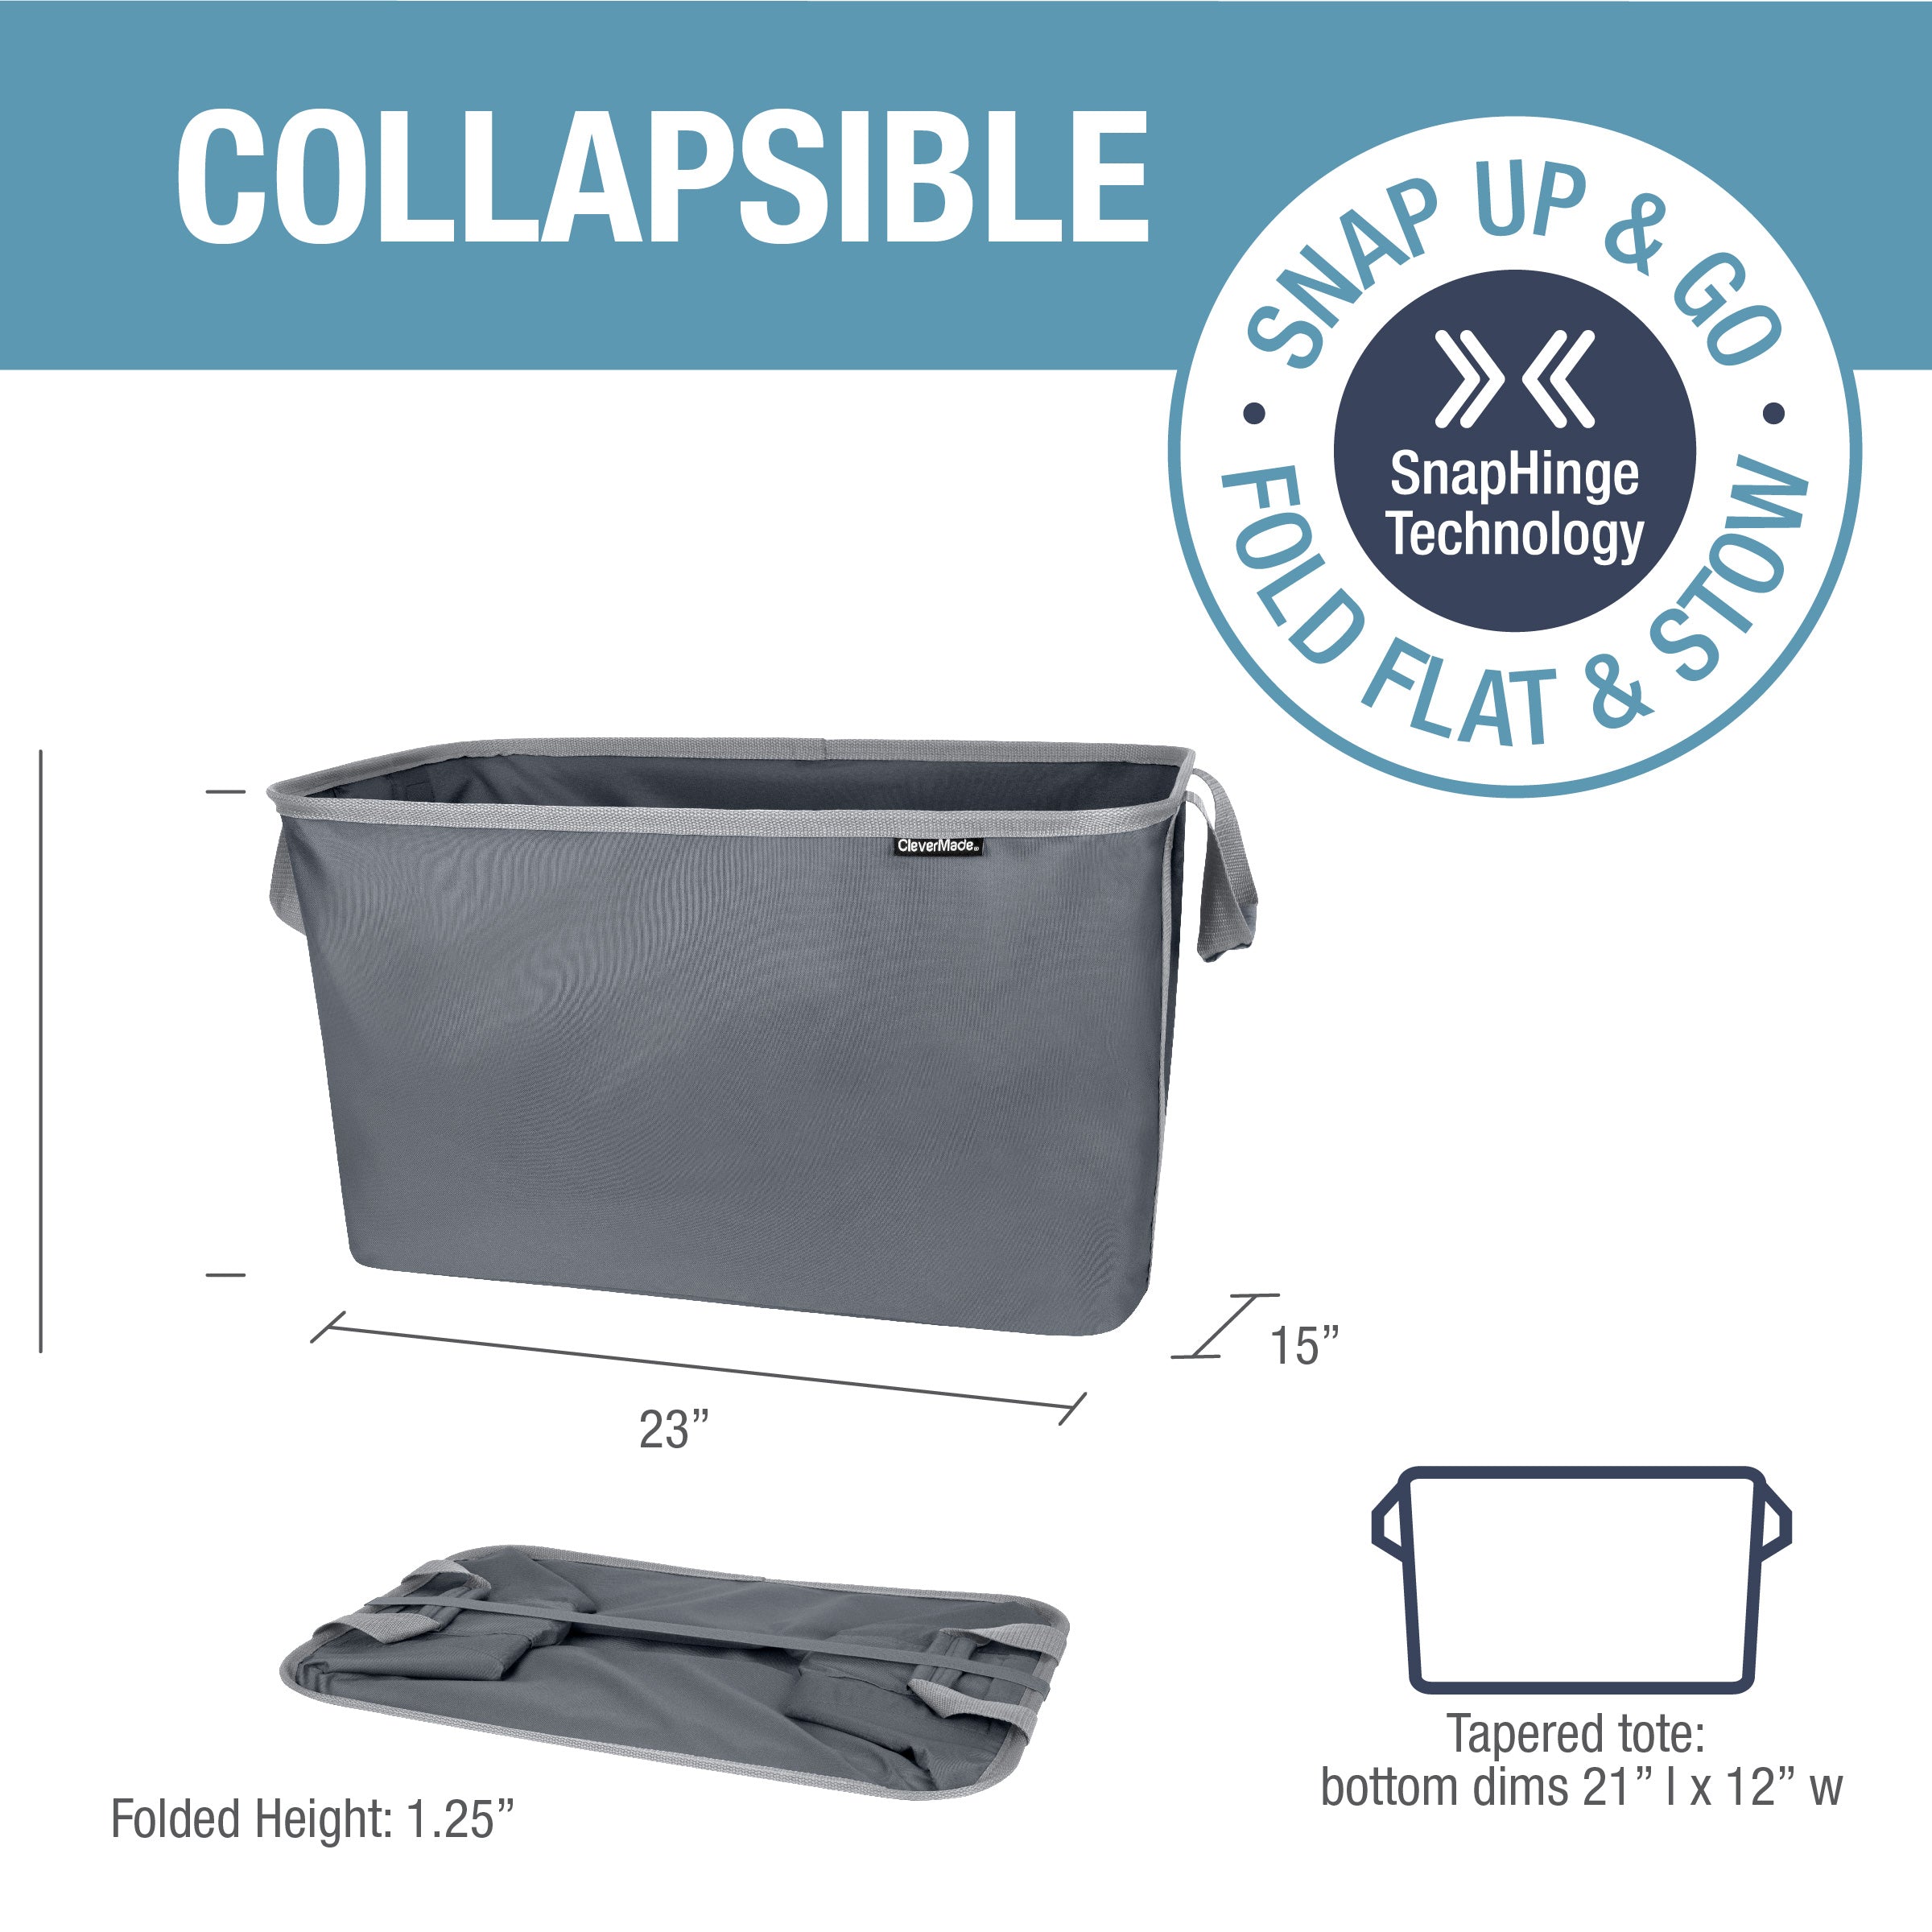 Collapsible Laundry Basket Tote - CleverMade